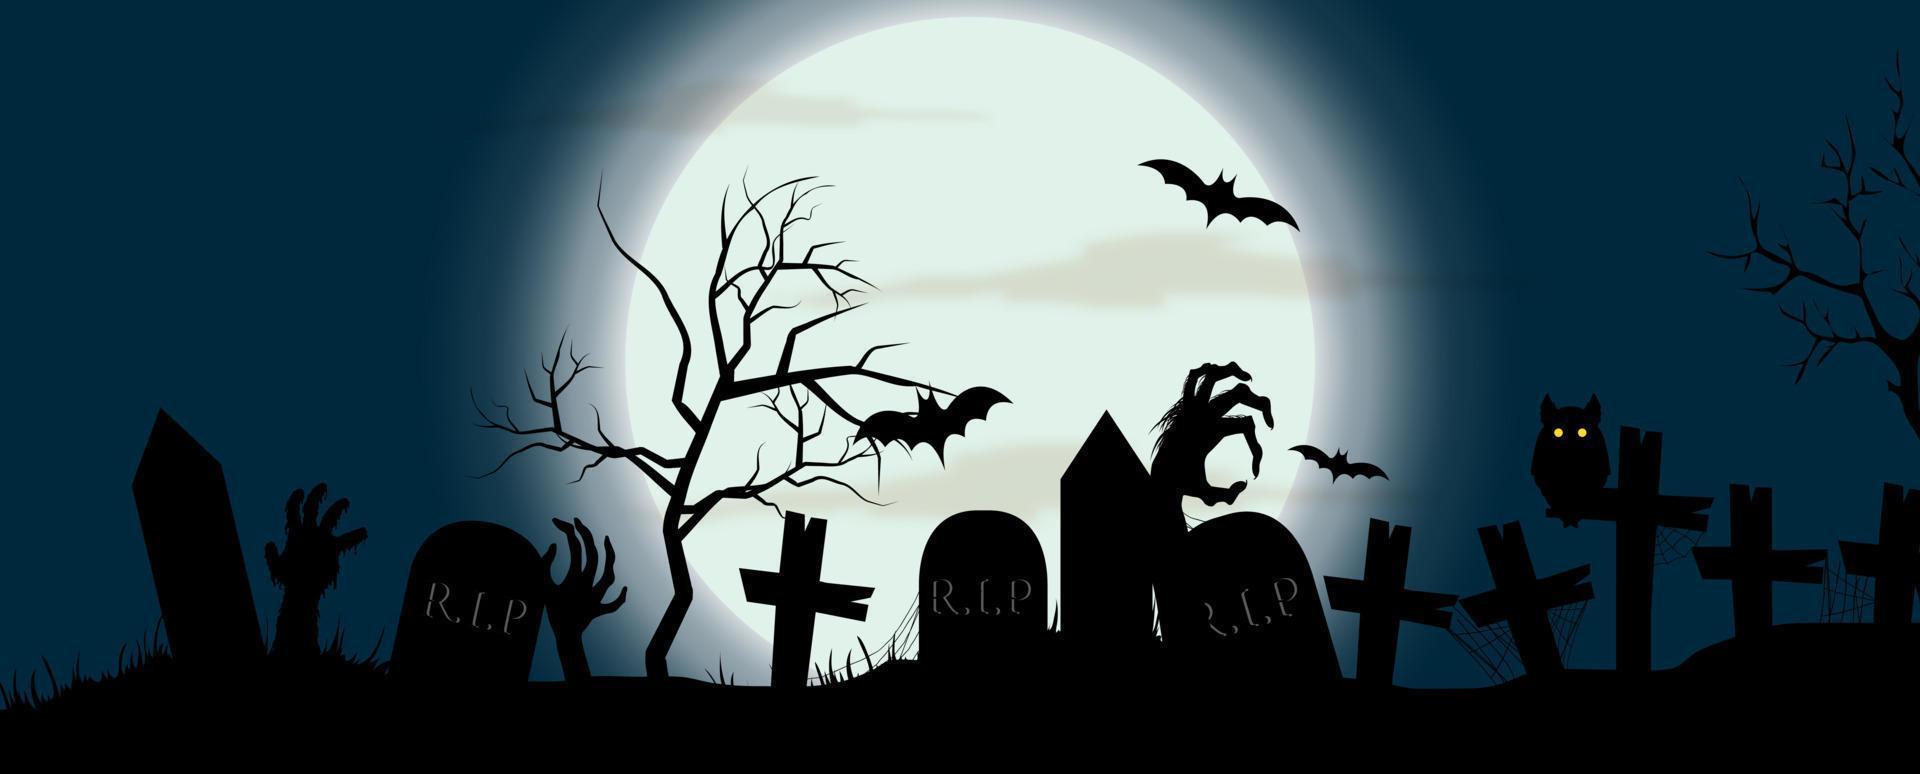 Greeting card and poster Black silhouette of graveyards and devils hands in Halloween day horror night scene. All in banner vector design.